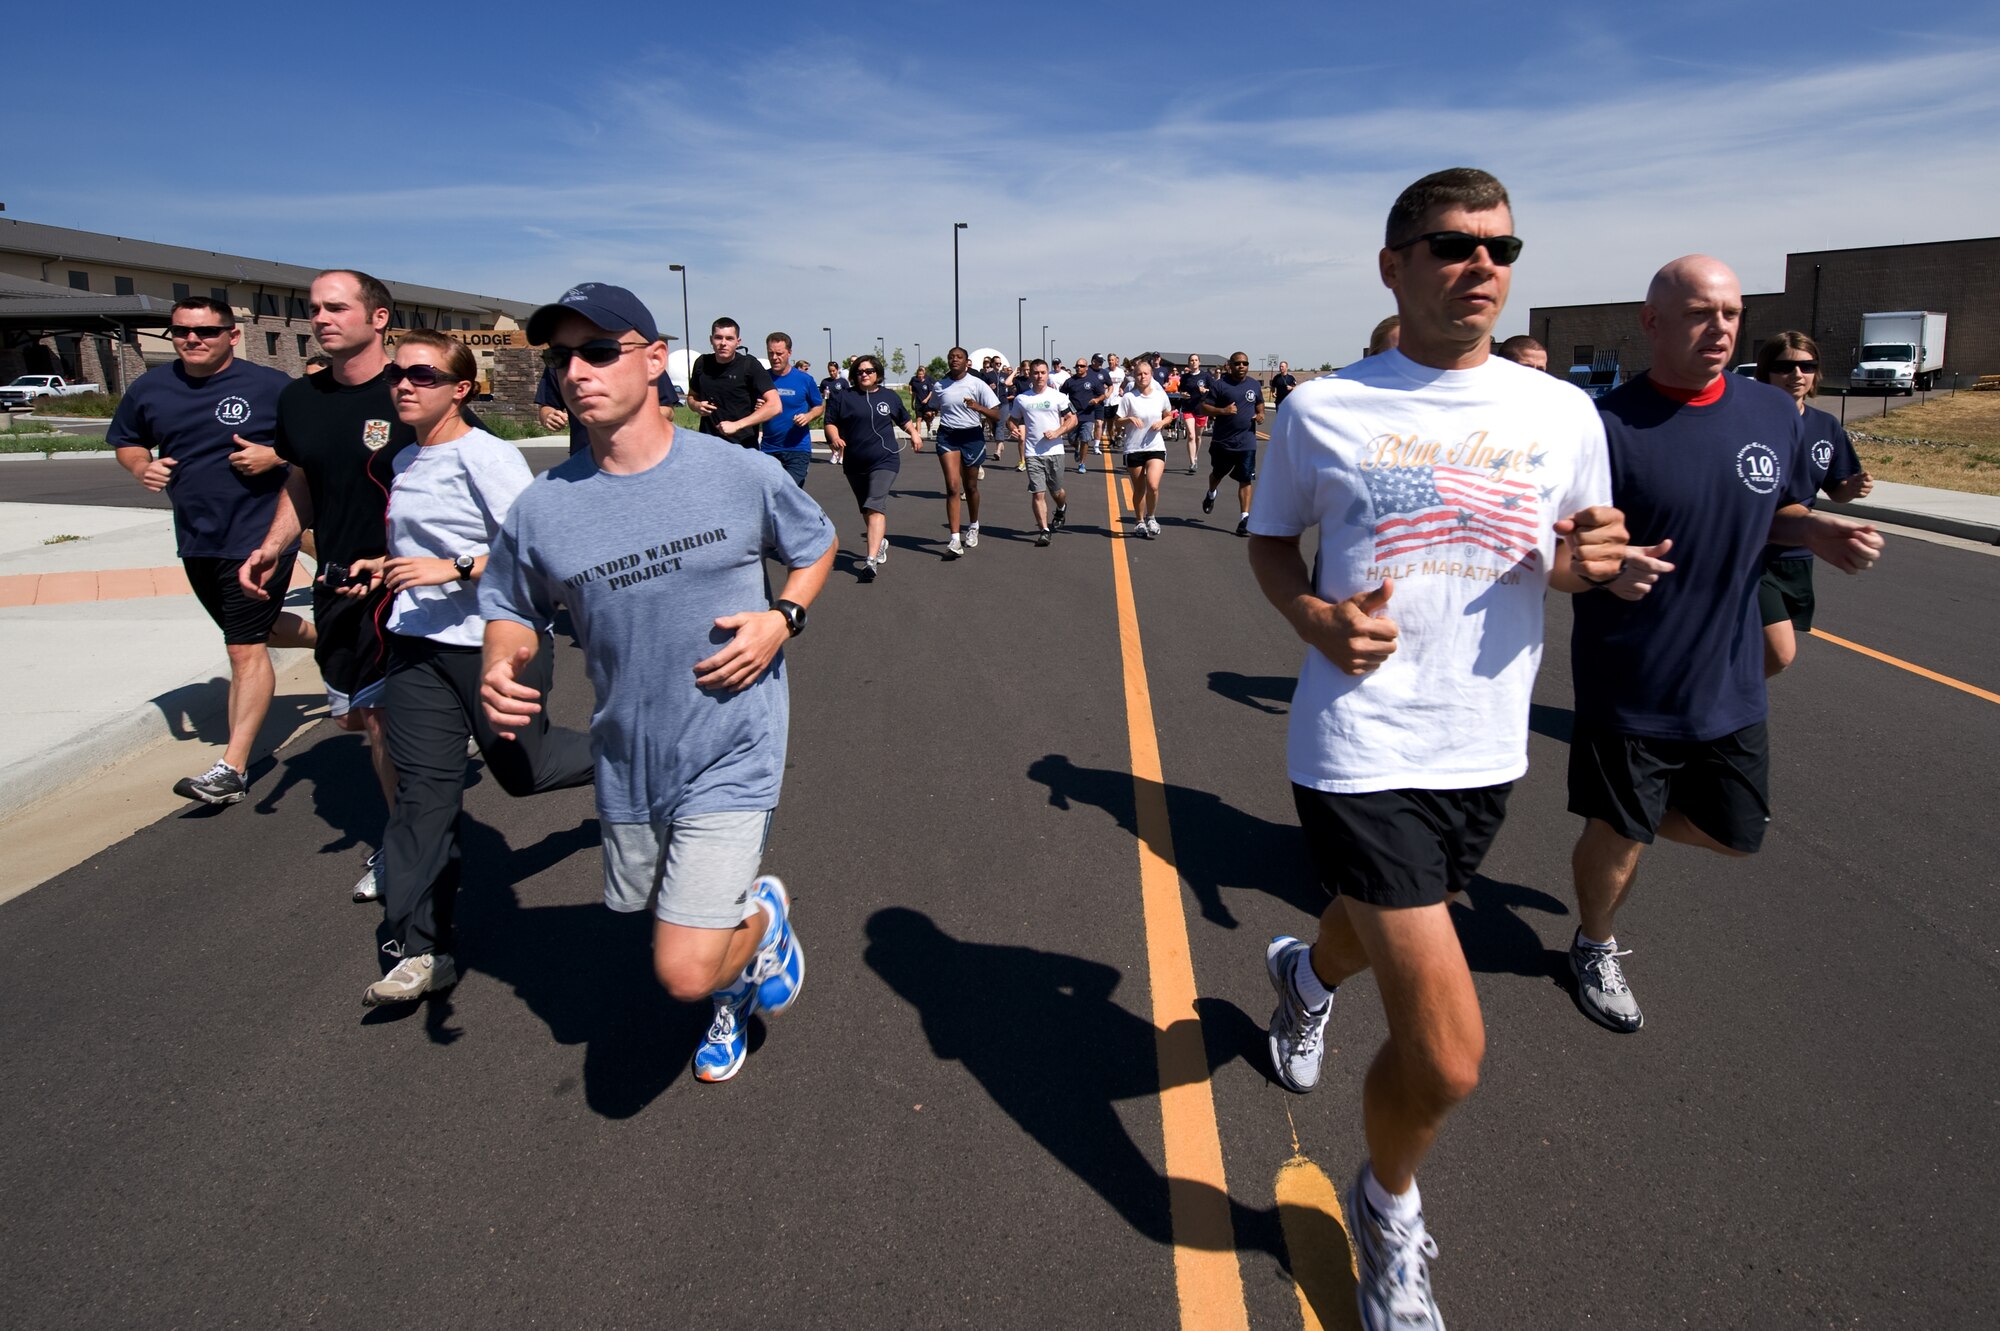 BUCKLEY AIR FORCE BASE, Colo. -- Members of Team Buckley begin the Buckley Remembers 5k on Sept. 9, 2011.  Service members run in remembrance of the ten year anniversary of the 9/11 attacks. (U.S. Air Force photo by Airman 1st Class Phillip Houk)